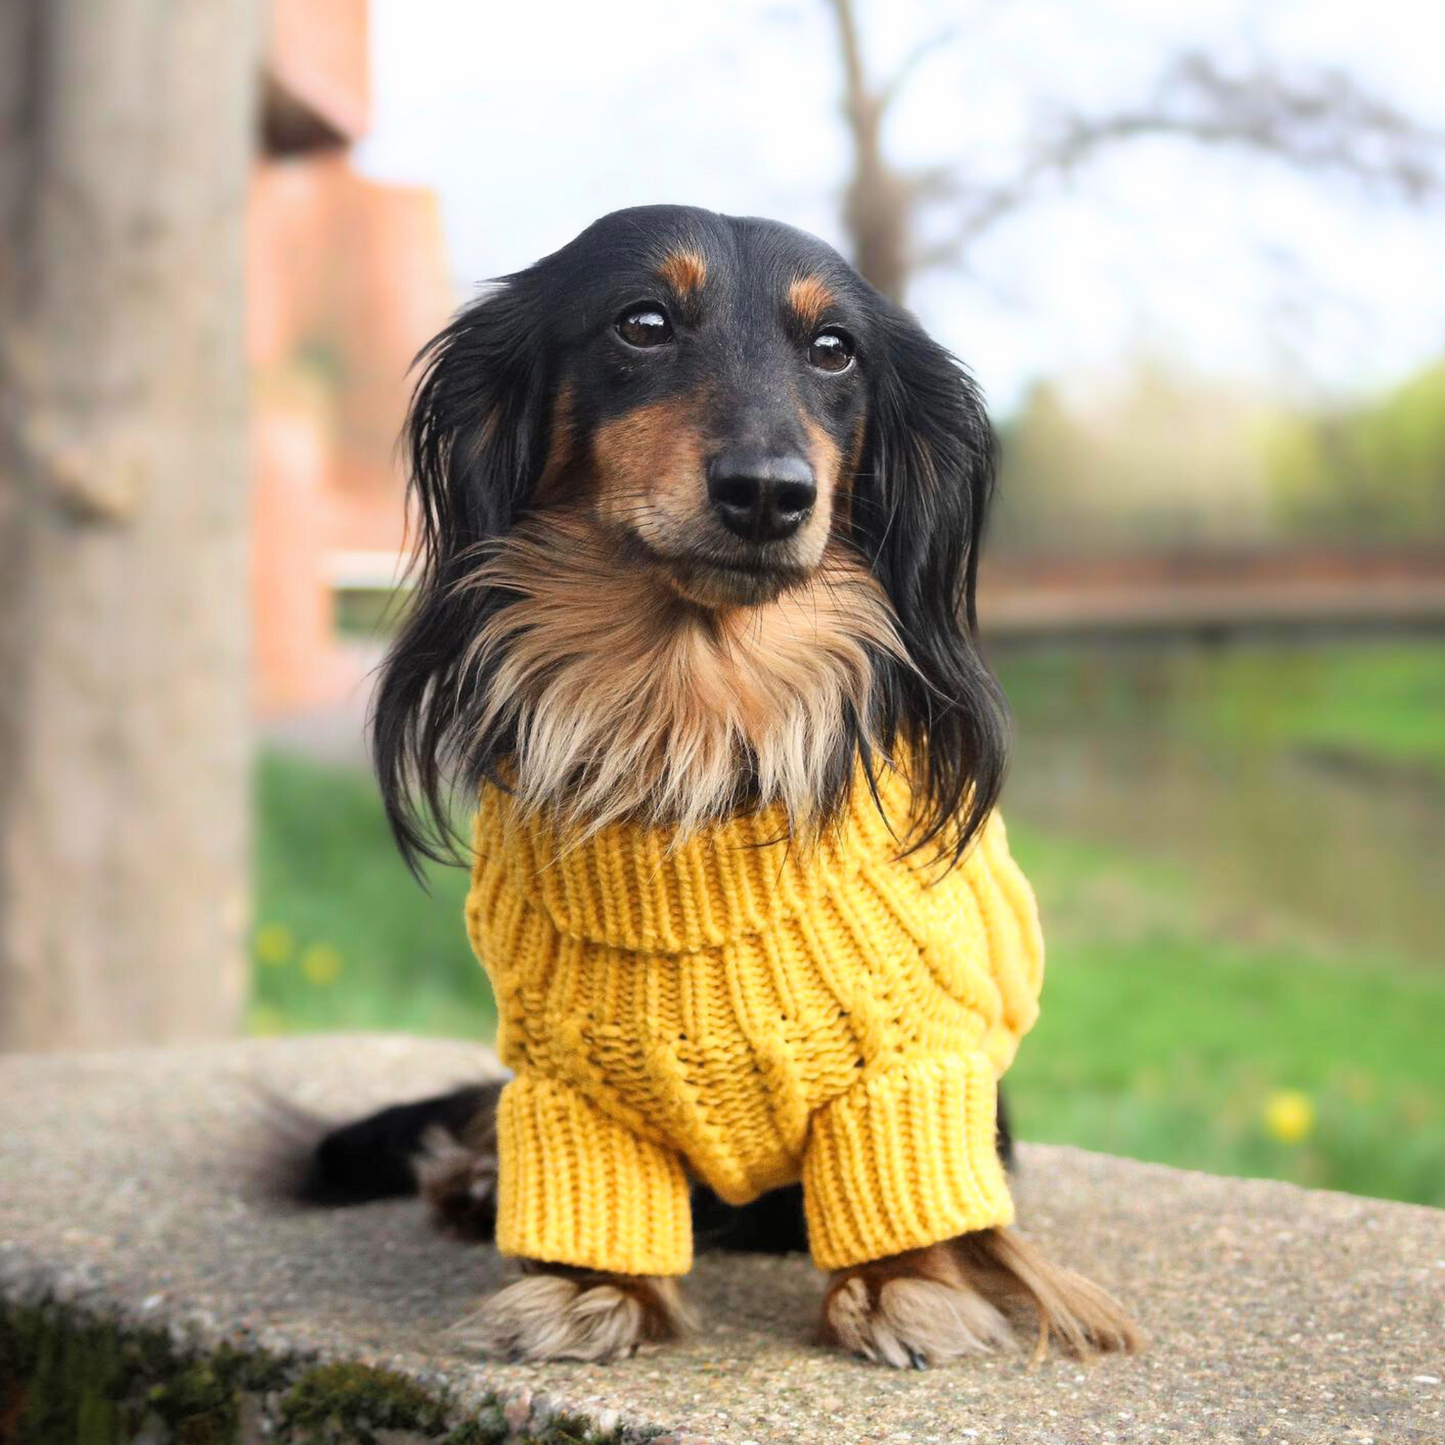 Cable Knit Jumper - Mustard